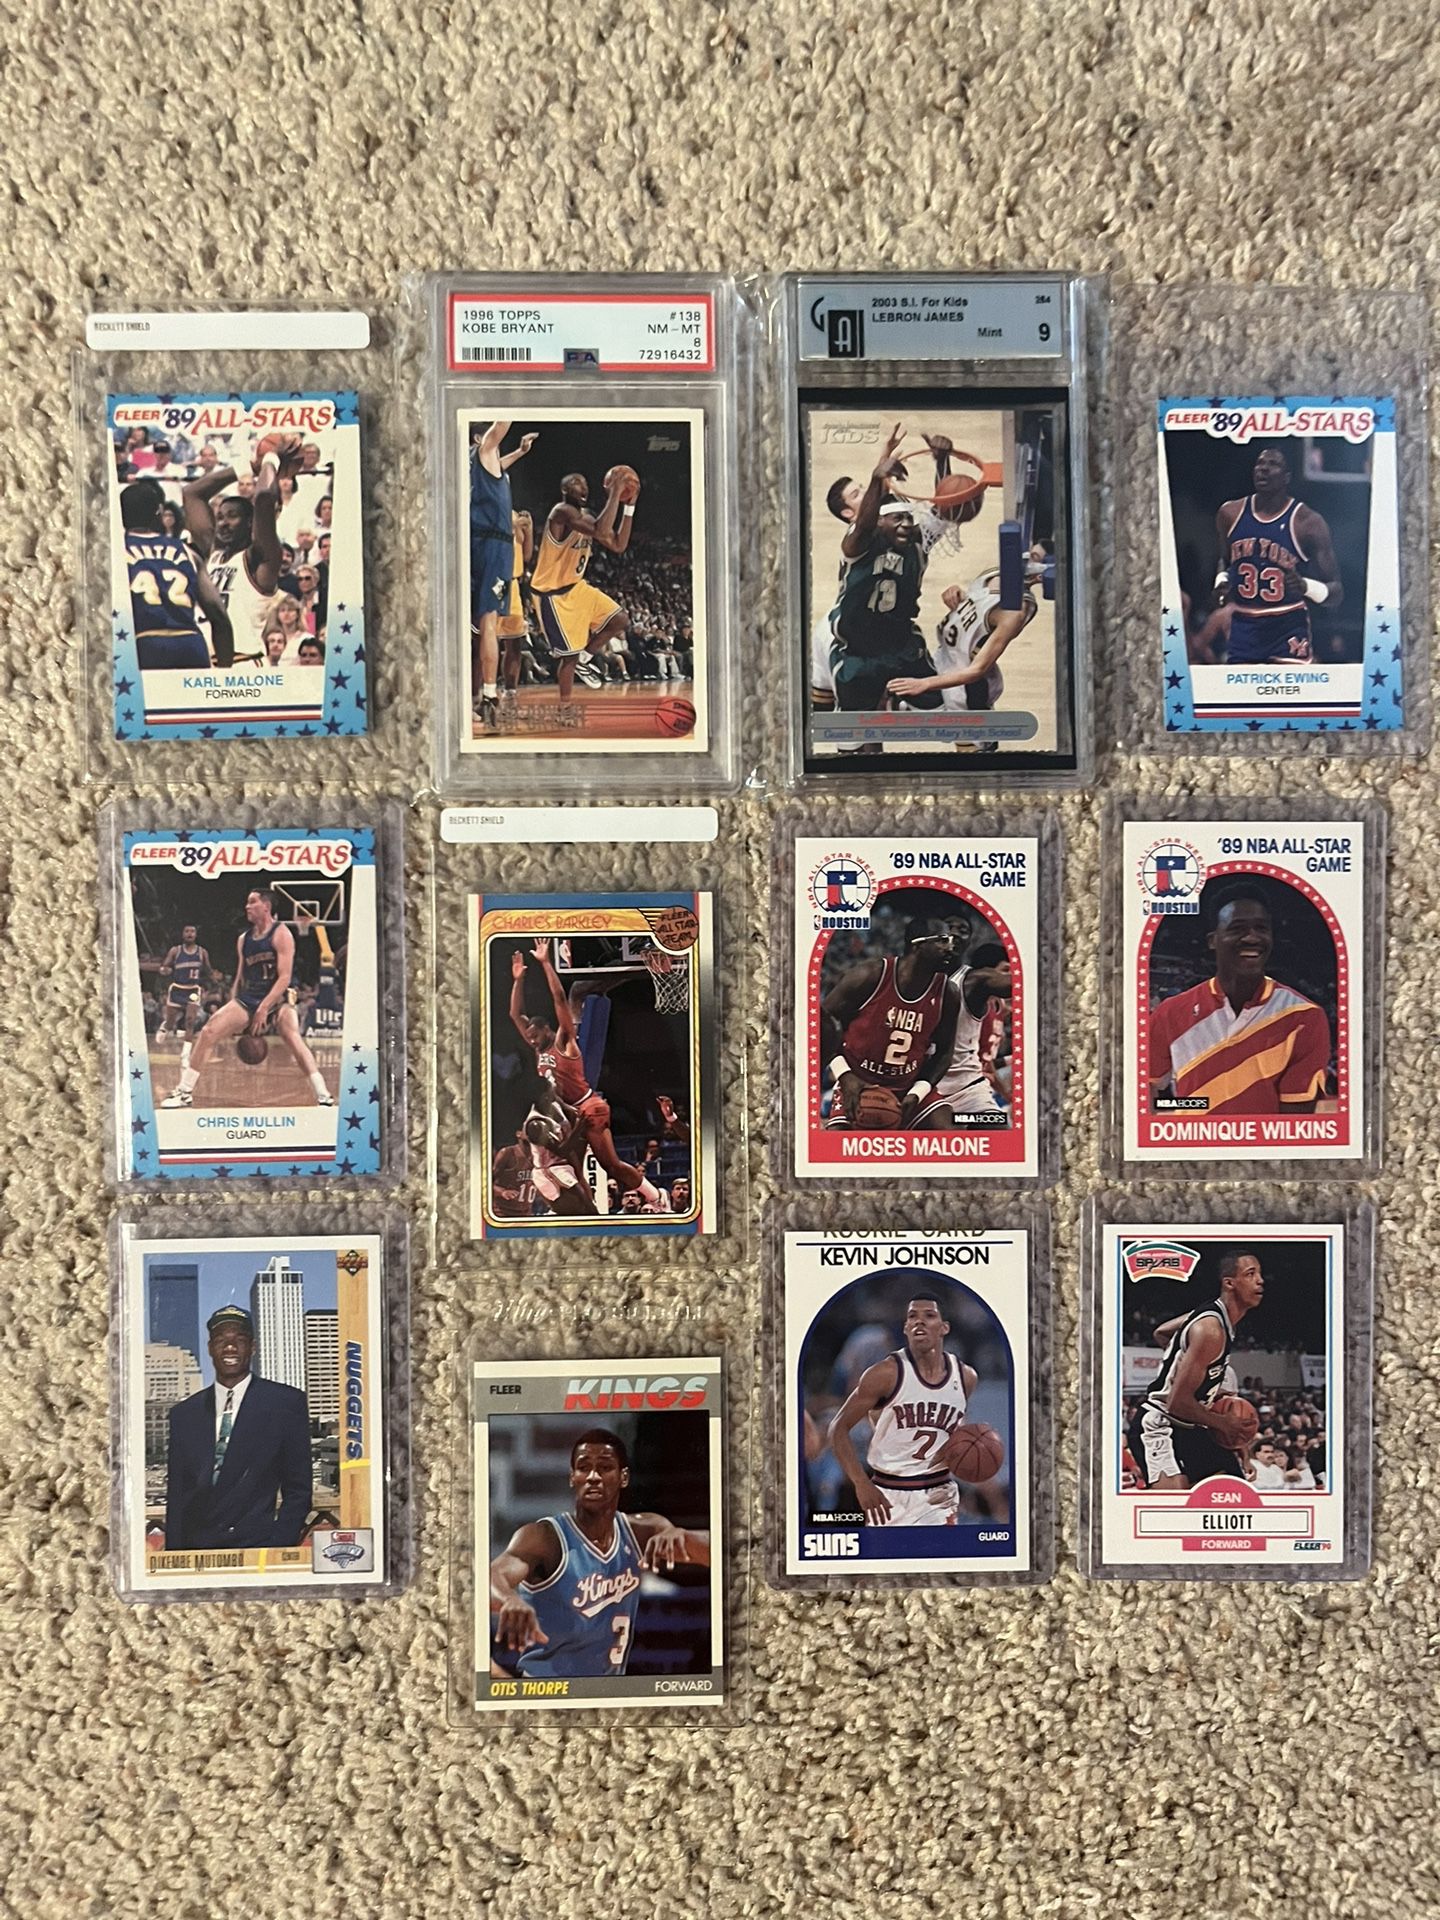 Kobe Bryant, Lebron James Rookies Graded 9, Other HOF Basketball Cards from 80’s